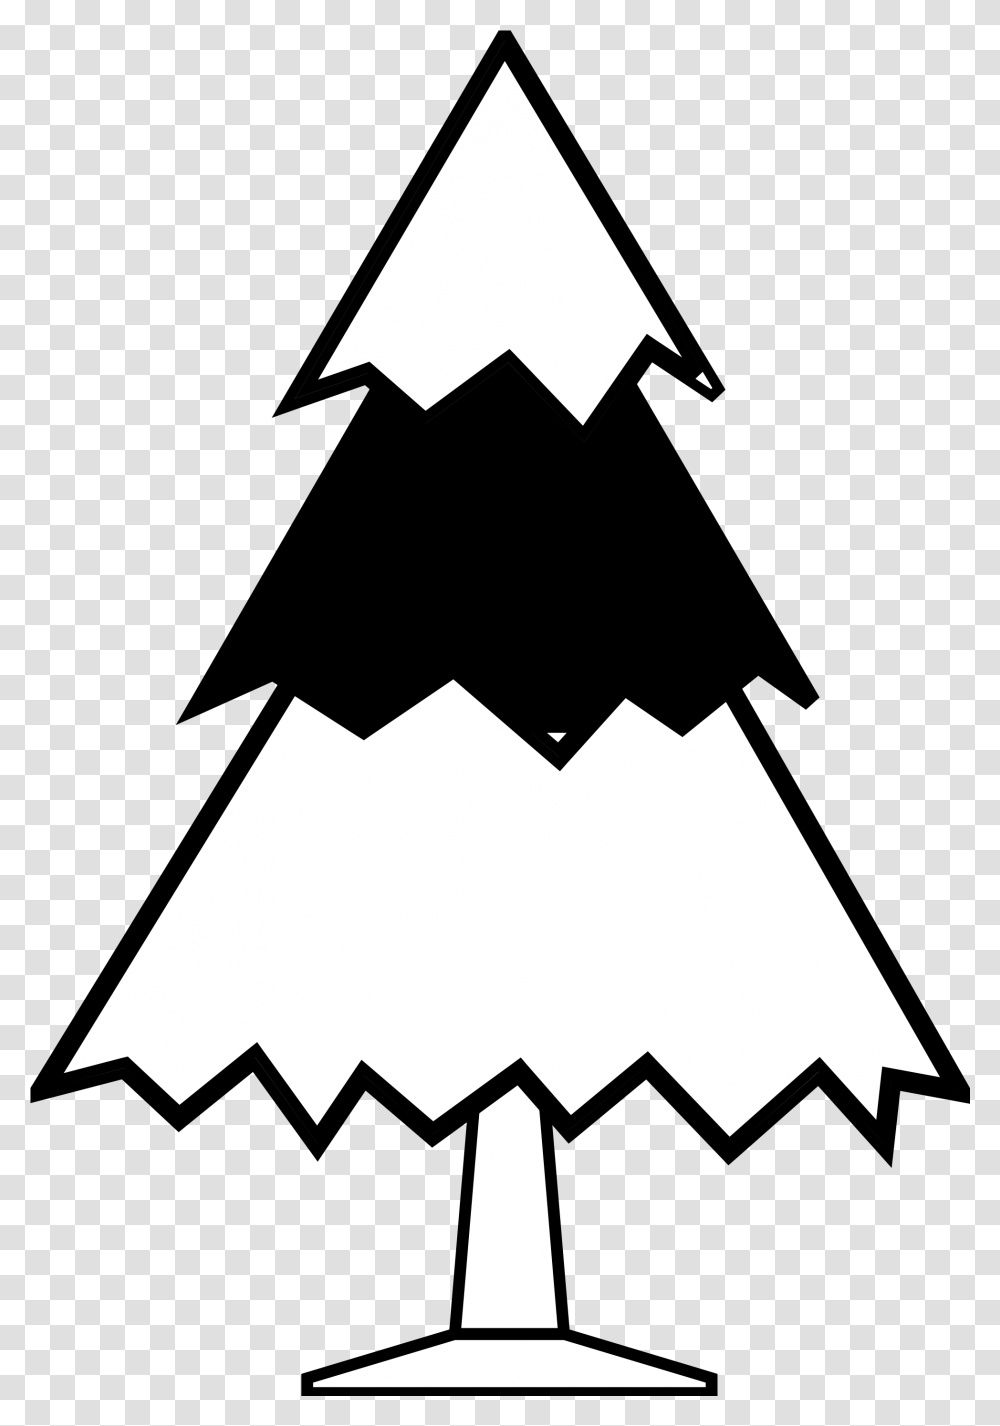 Download Hd Present Black And White Christmas Simple Easy Drawing Tree, Symbol, Cross, Stencil, Star Symbol Transparent Png